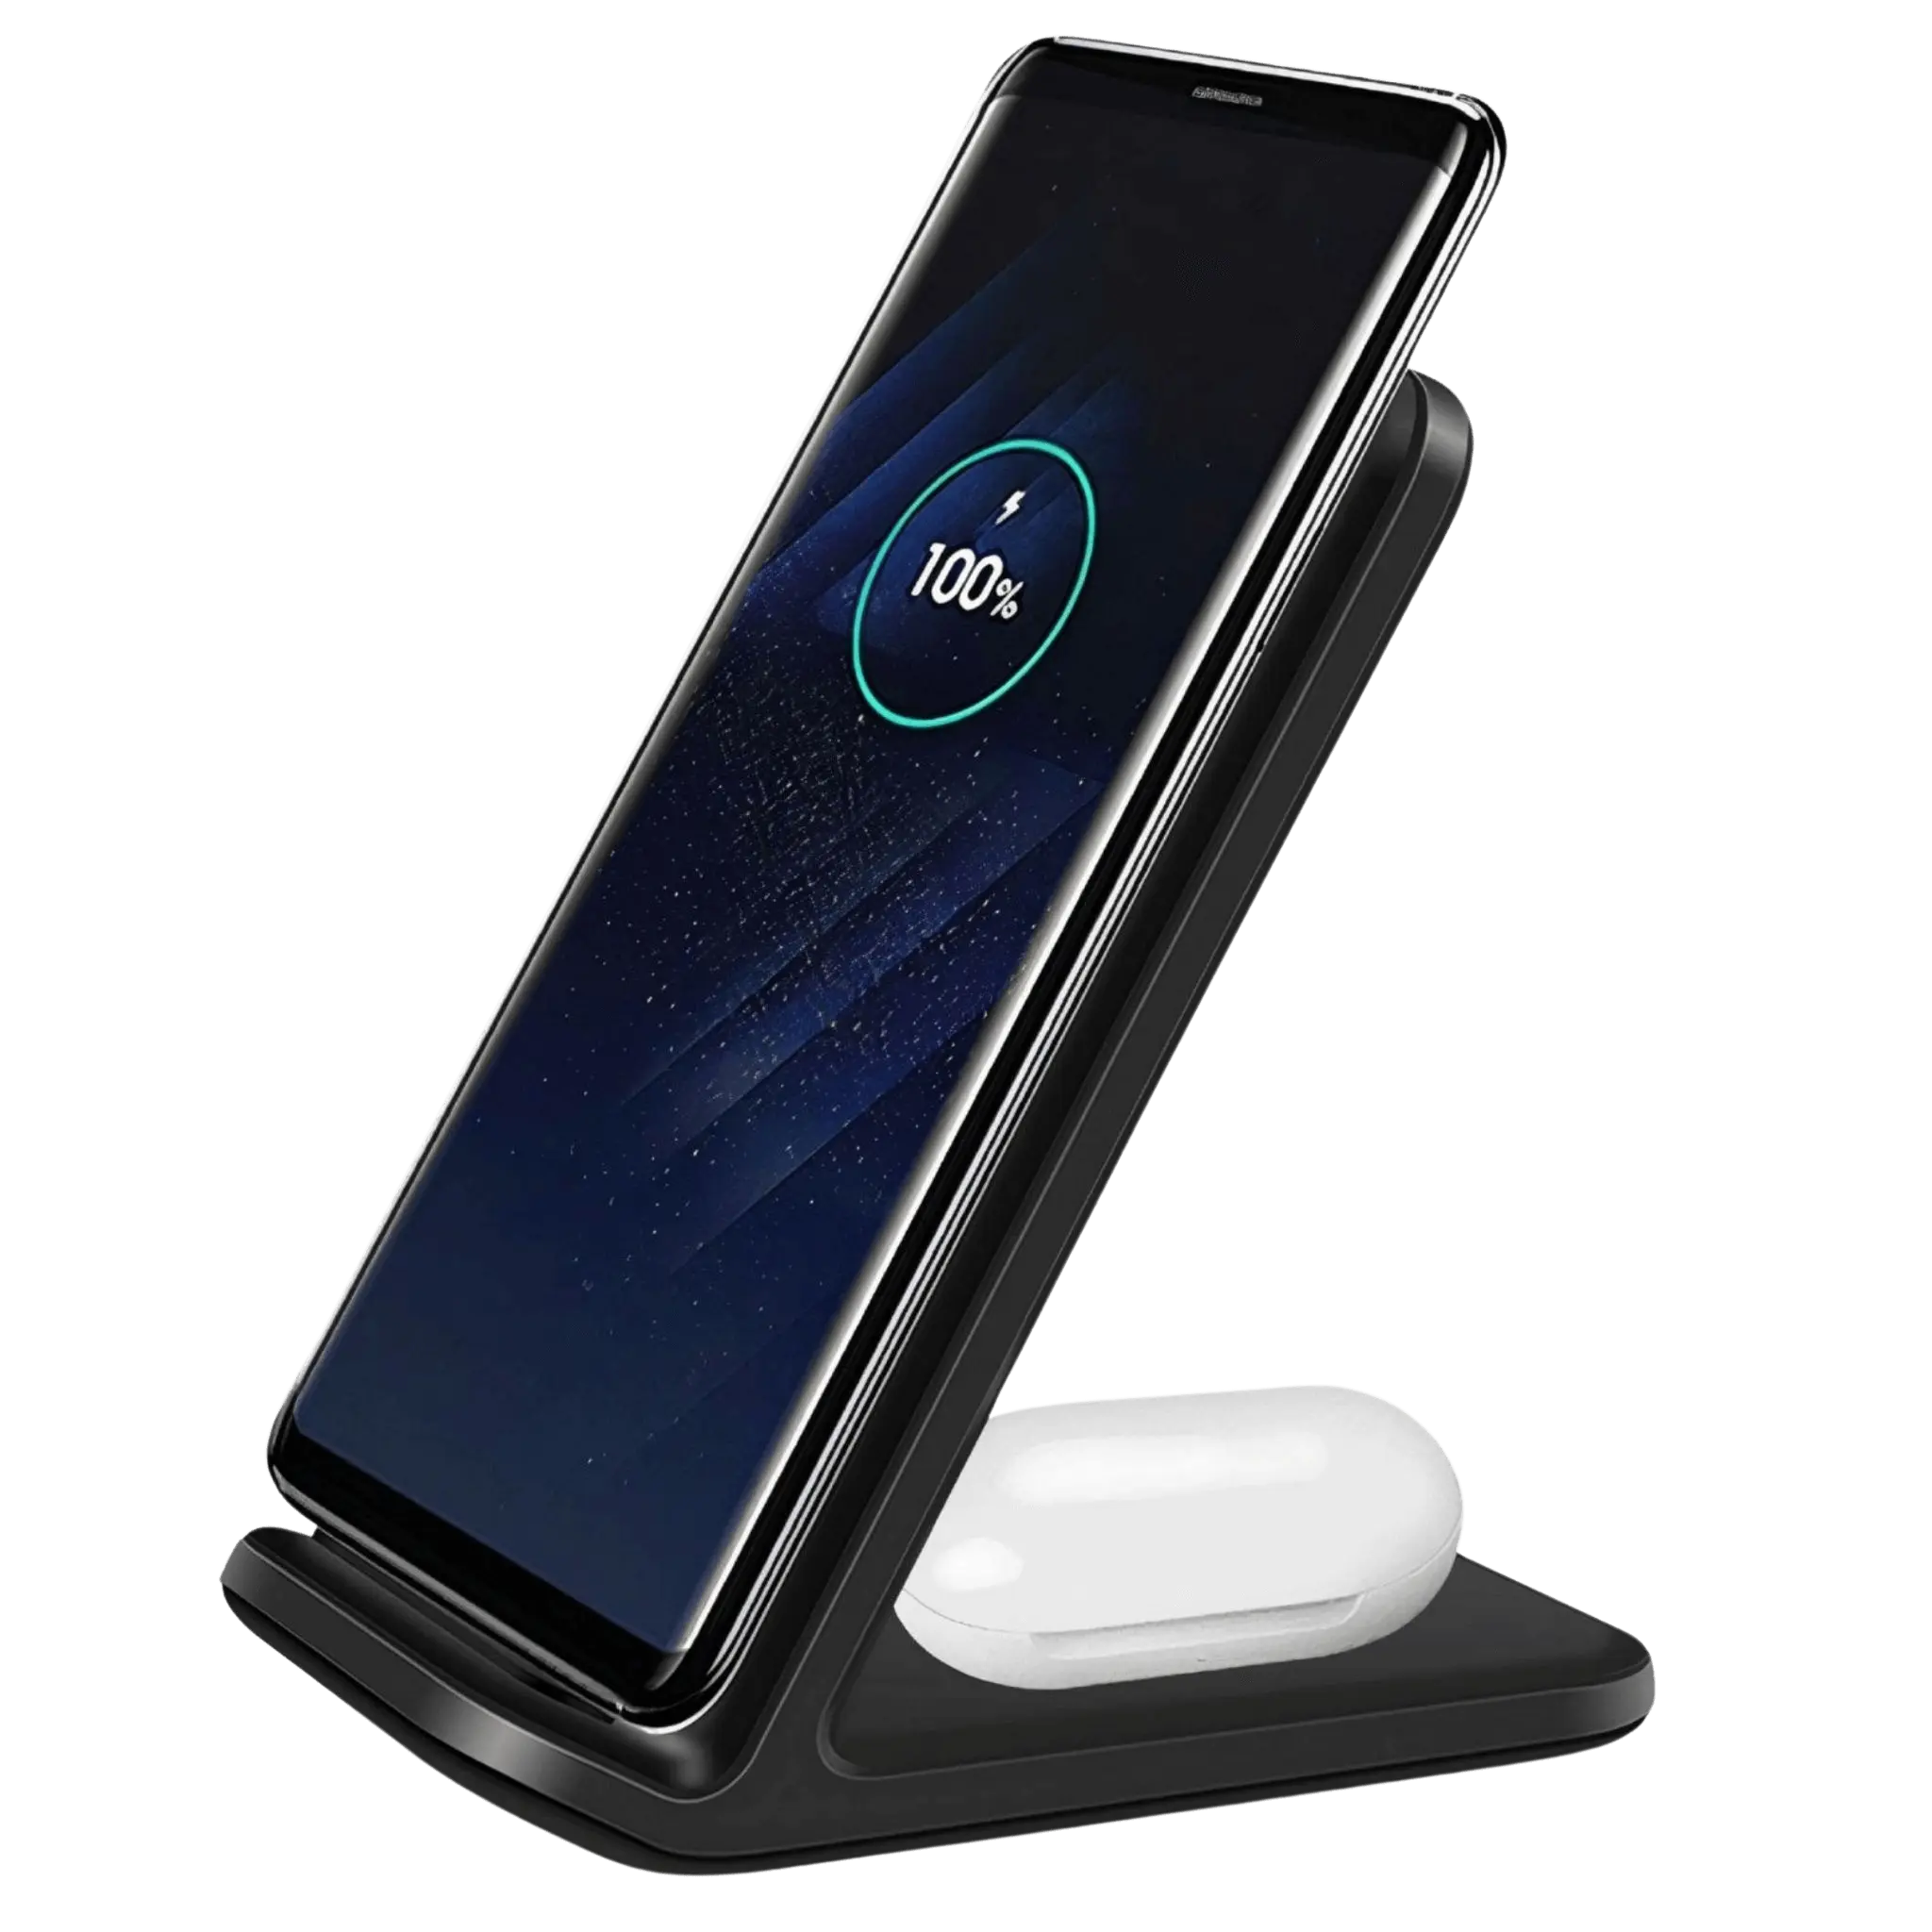 Wireless Charger Stand - 10W, Folding for Travel